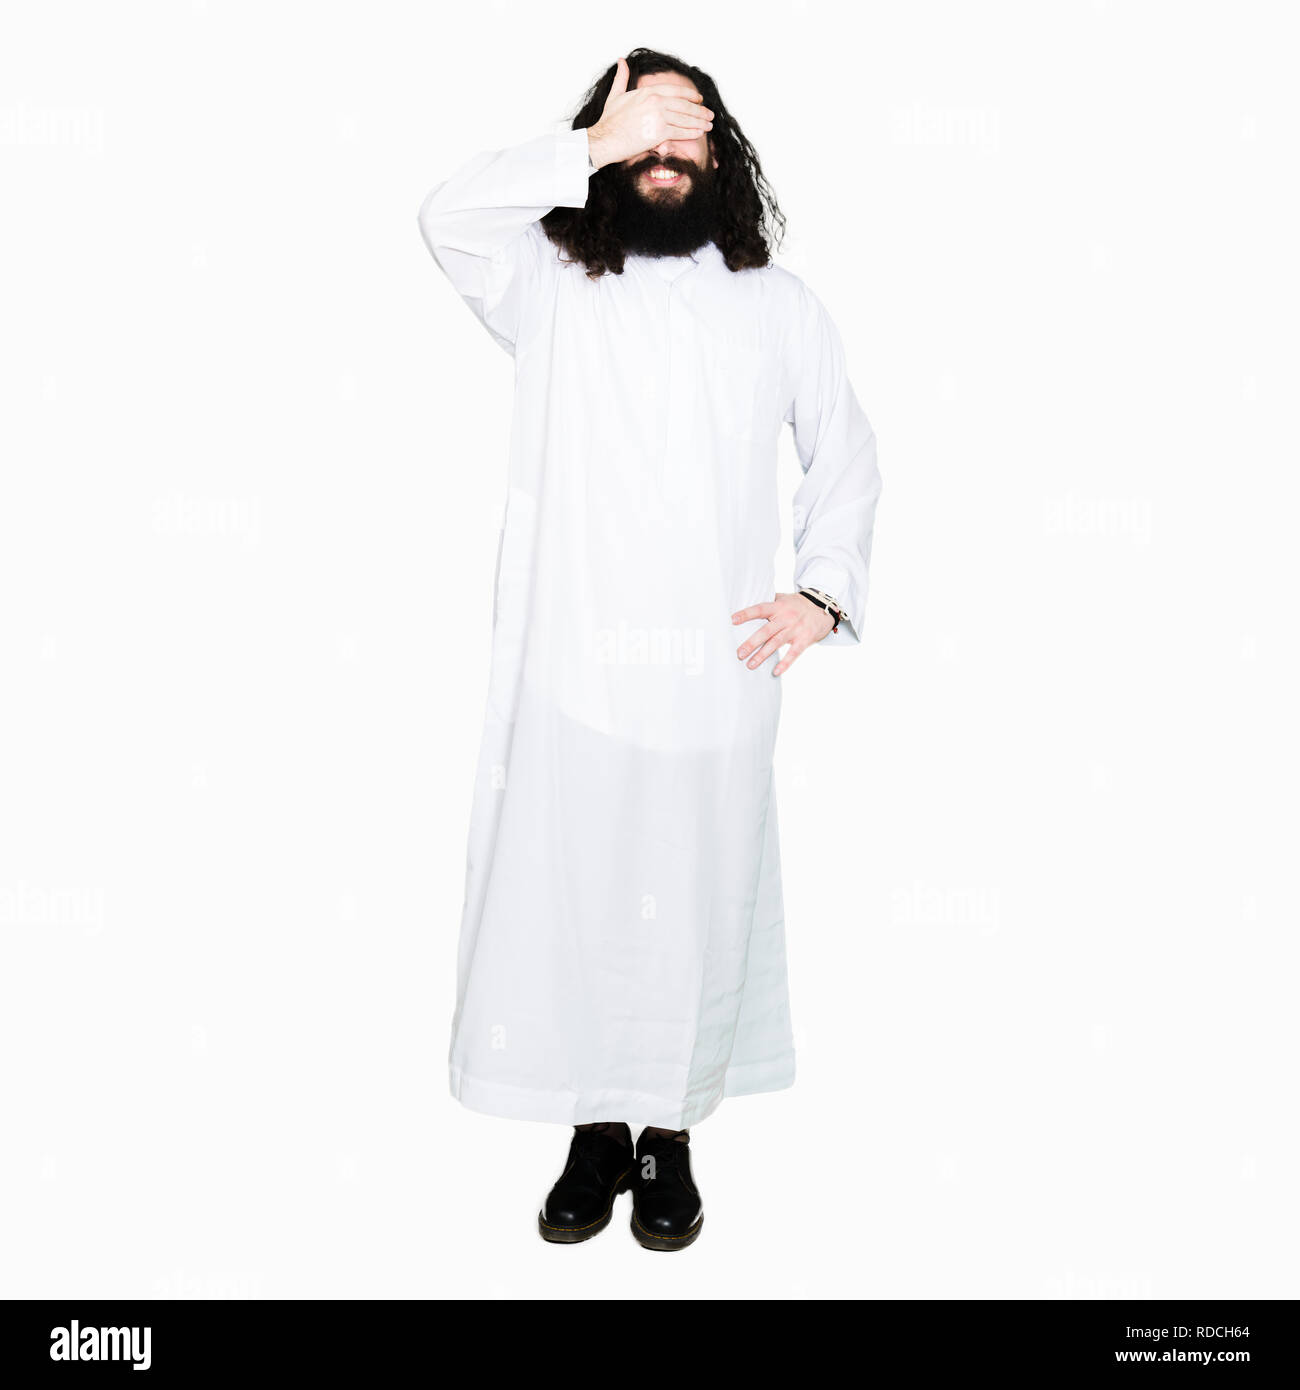 Man wearing Jesus Christ costume smiling and laughing with hand on face covering eyes for surprise. Blind concept. Stock Photo